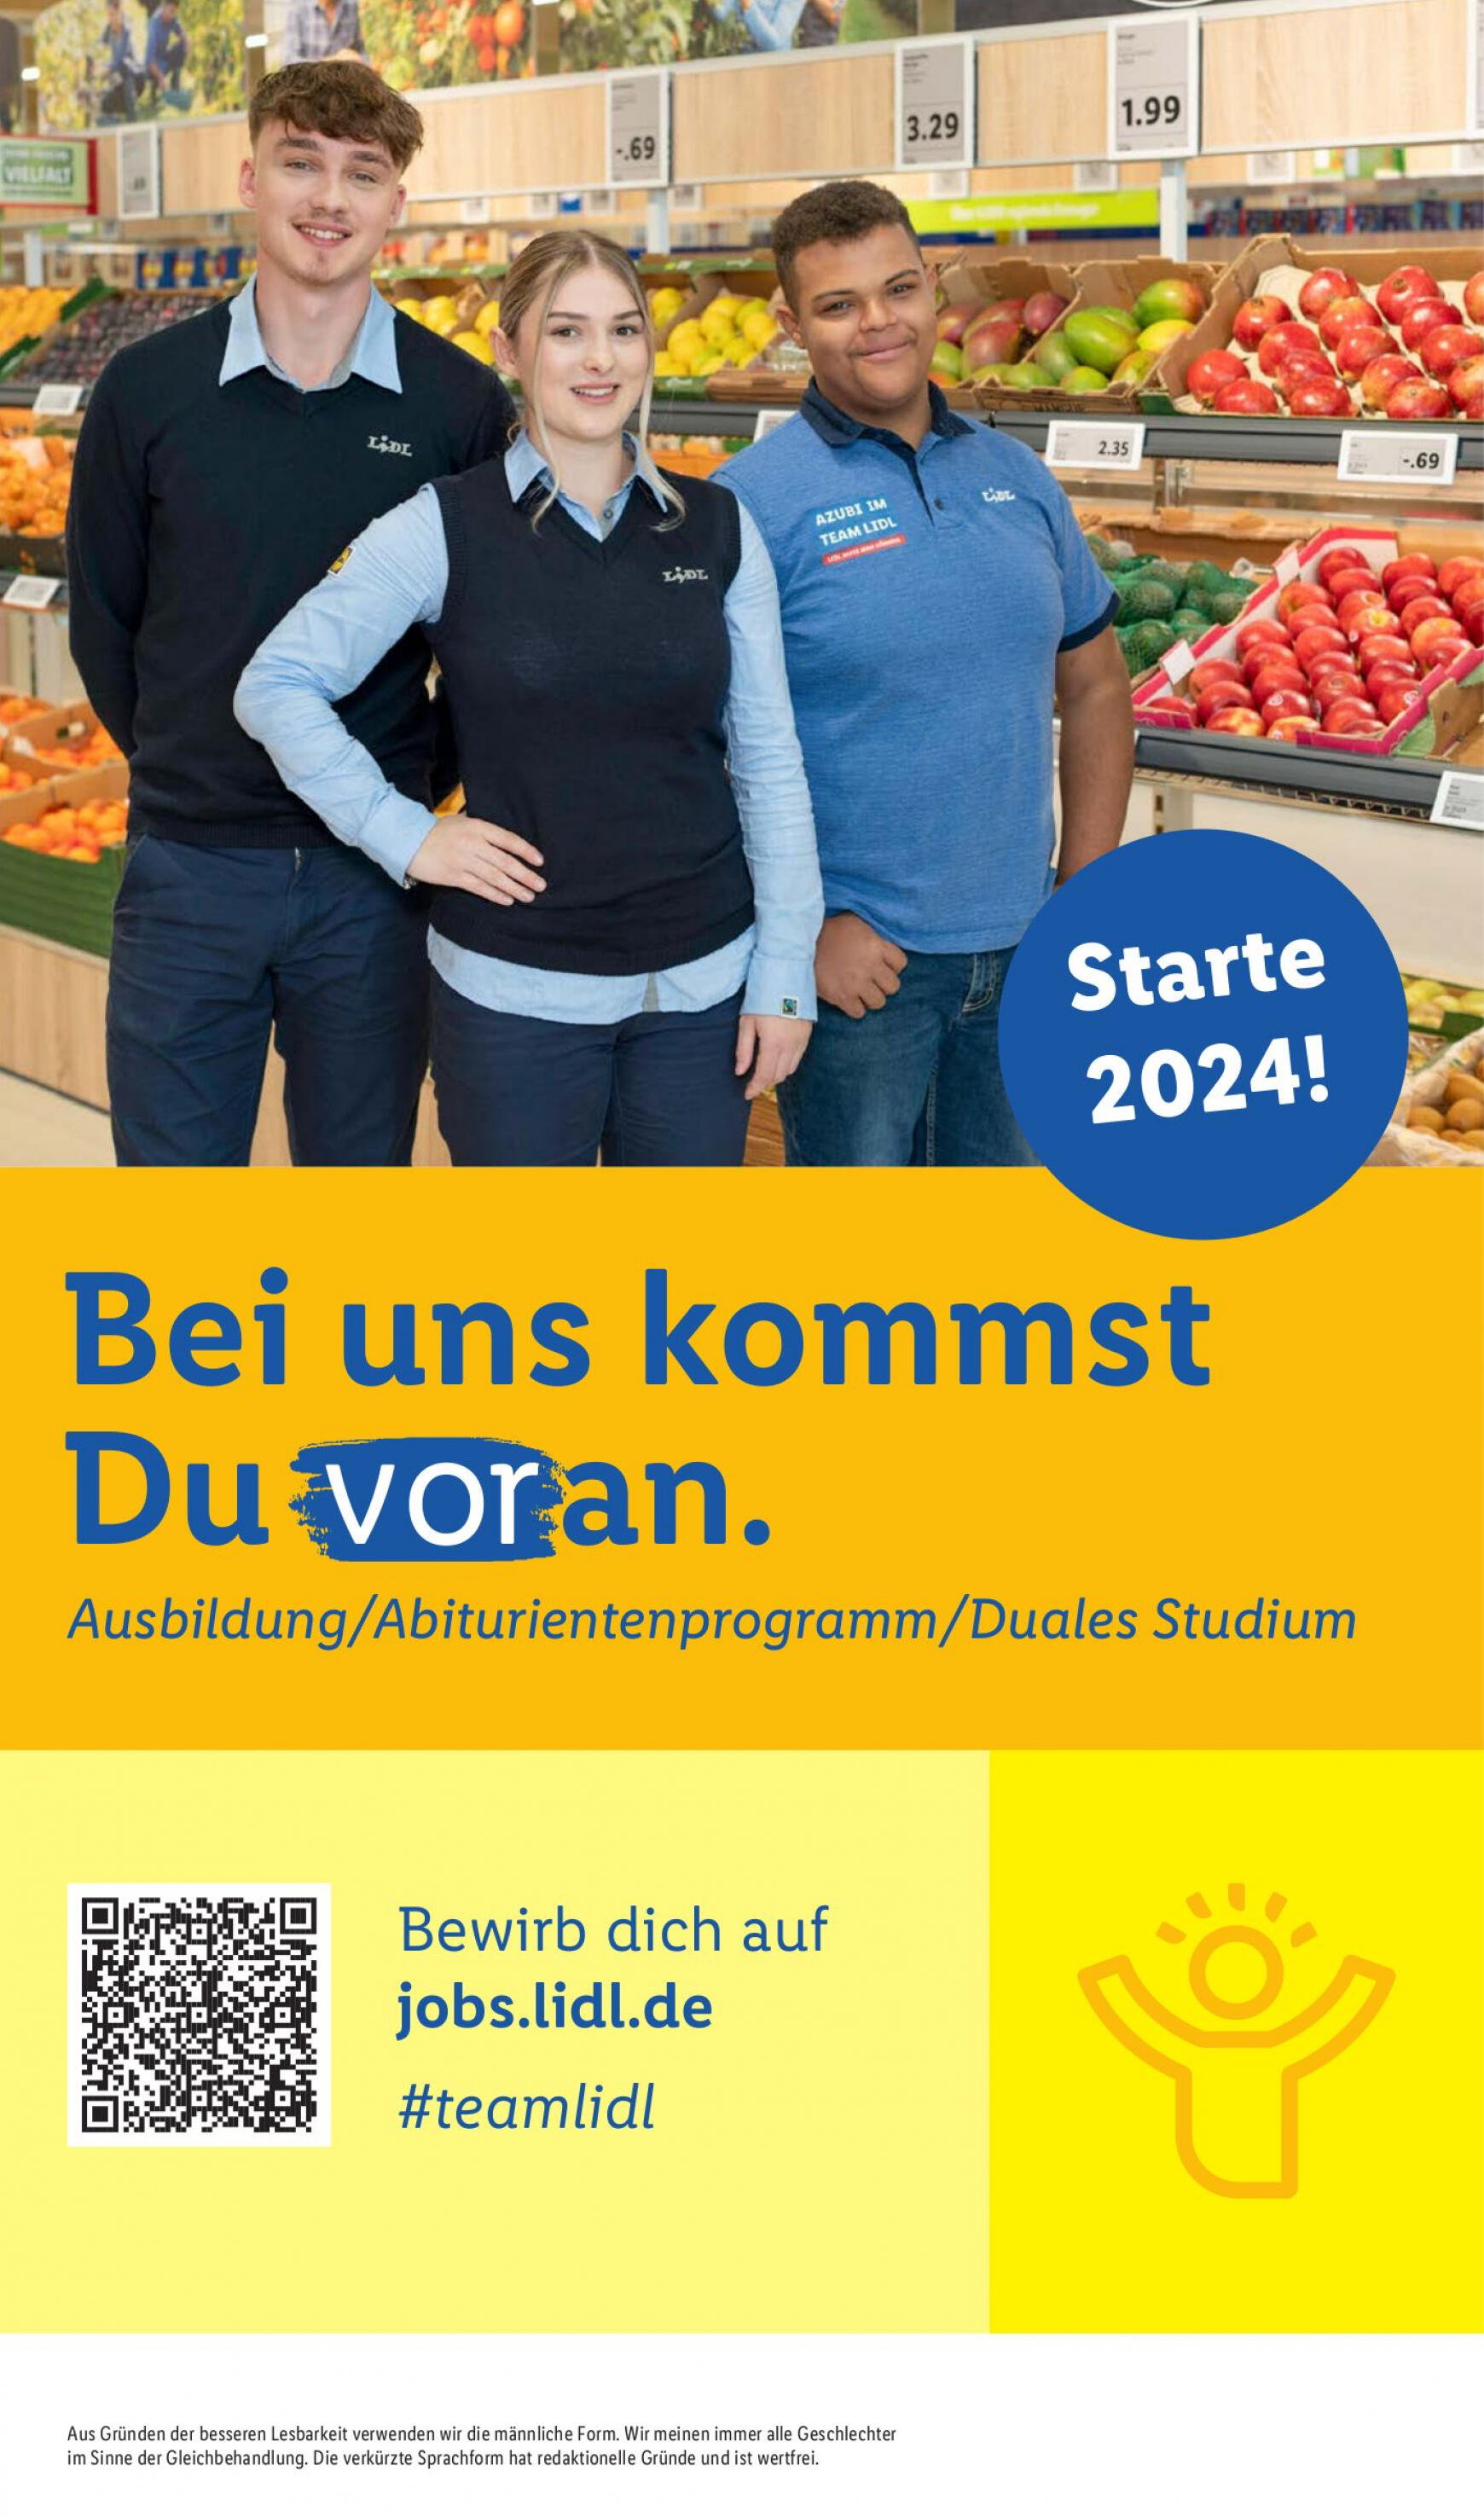 lidl - Flyer Lidl aktuell 15.04. - 20.04. - page: 53